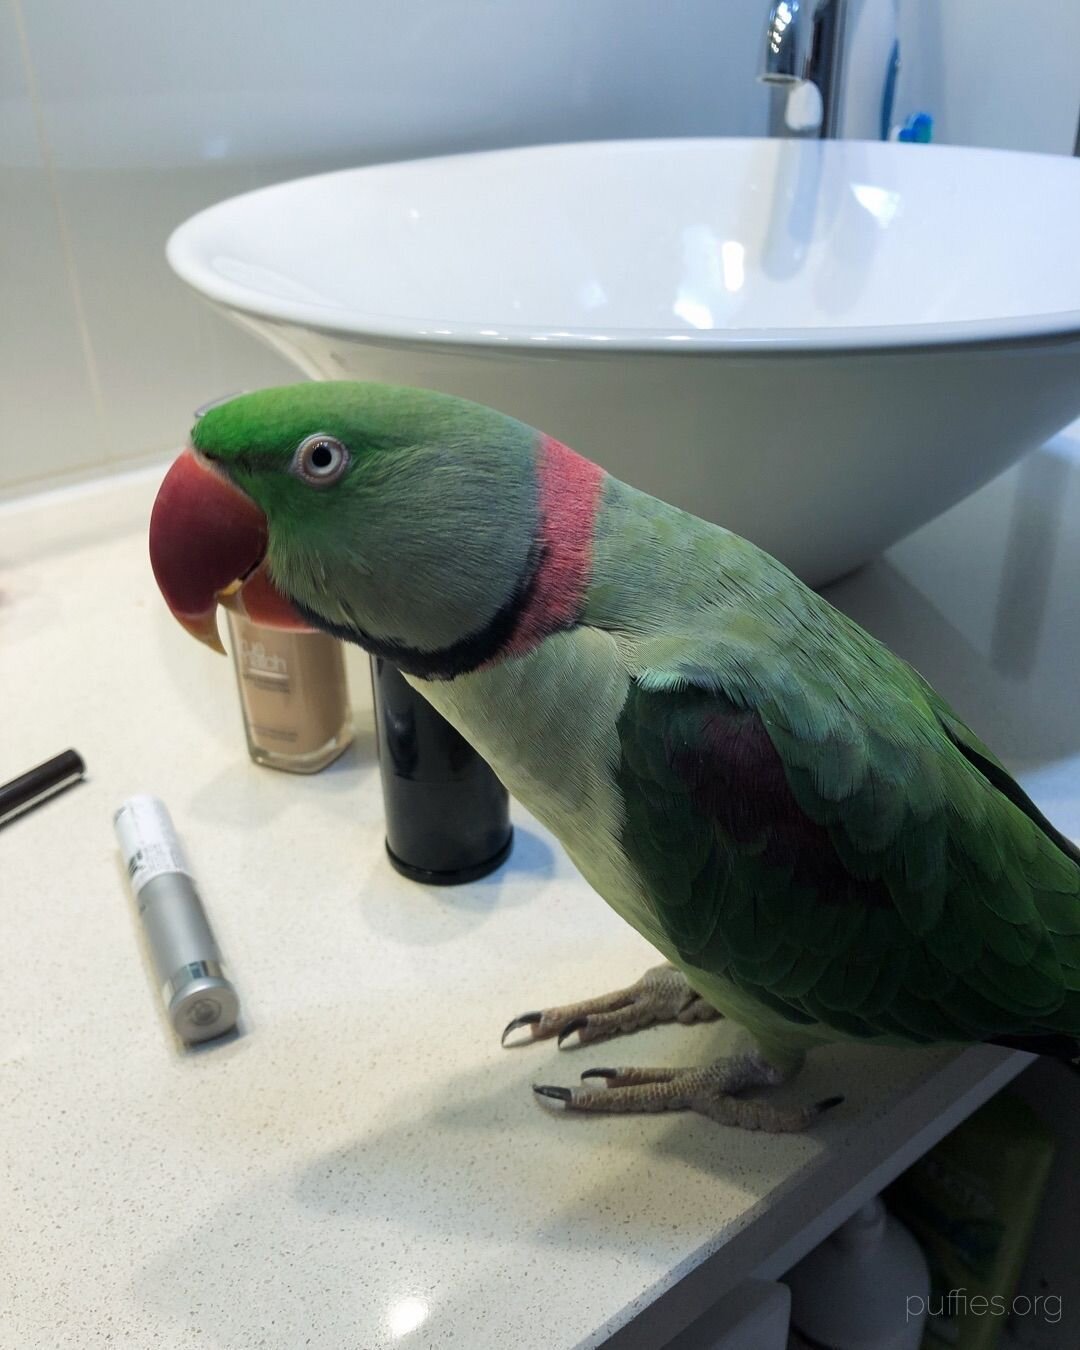 I help mom get ready for the world every day! 🦜

#alexandrineparrot #psittaculaeupatria #petsofinstagram #bird #parrot #littlegreenfeathers #cute #green #pet #feathers